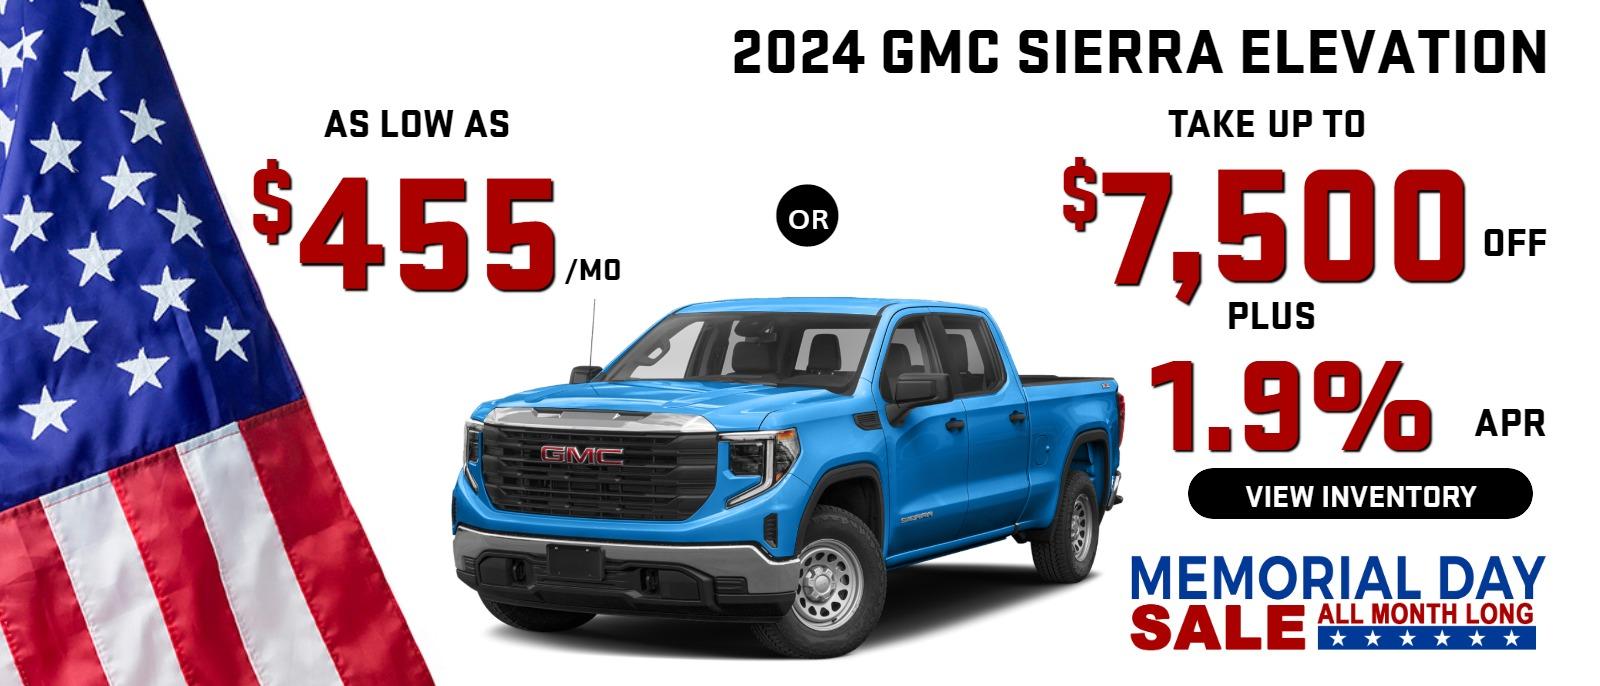 2024 sierra elevation
Stock G2404

AS LOW AS $455/mo
or
take up to $7500 OFF
PLUS 
1.9 % finance